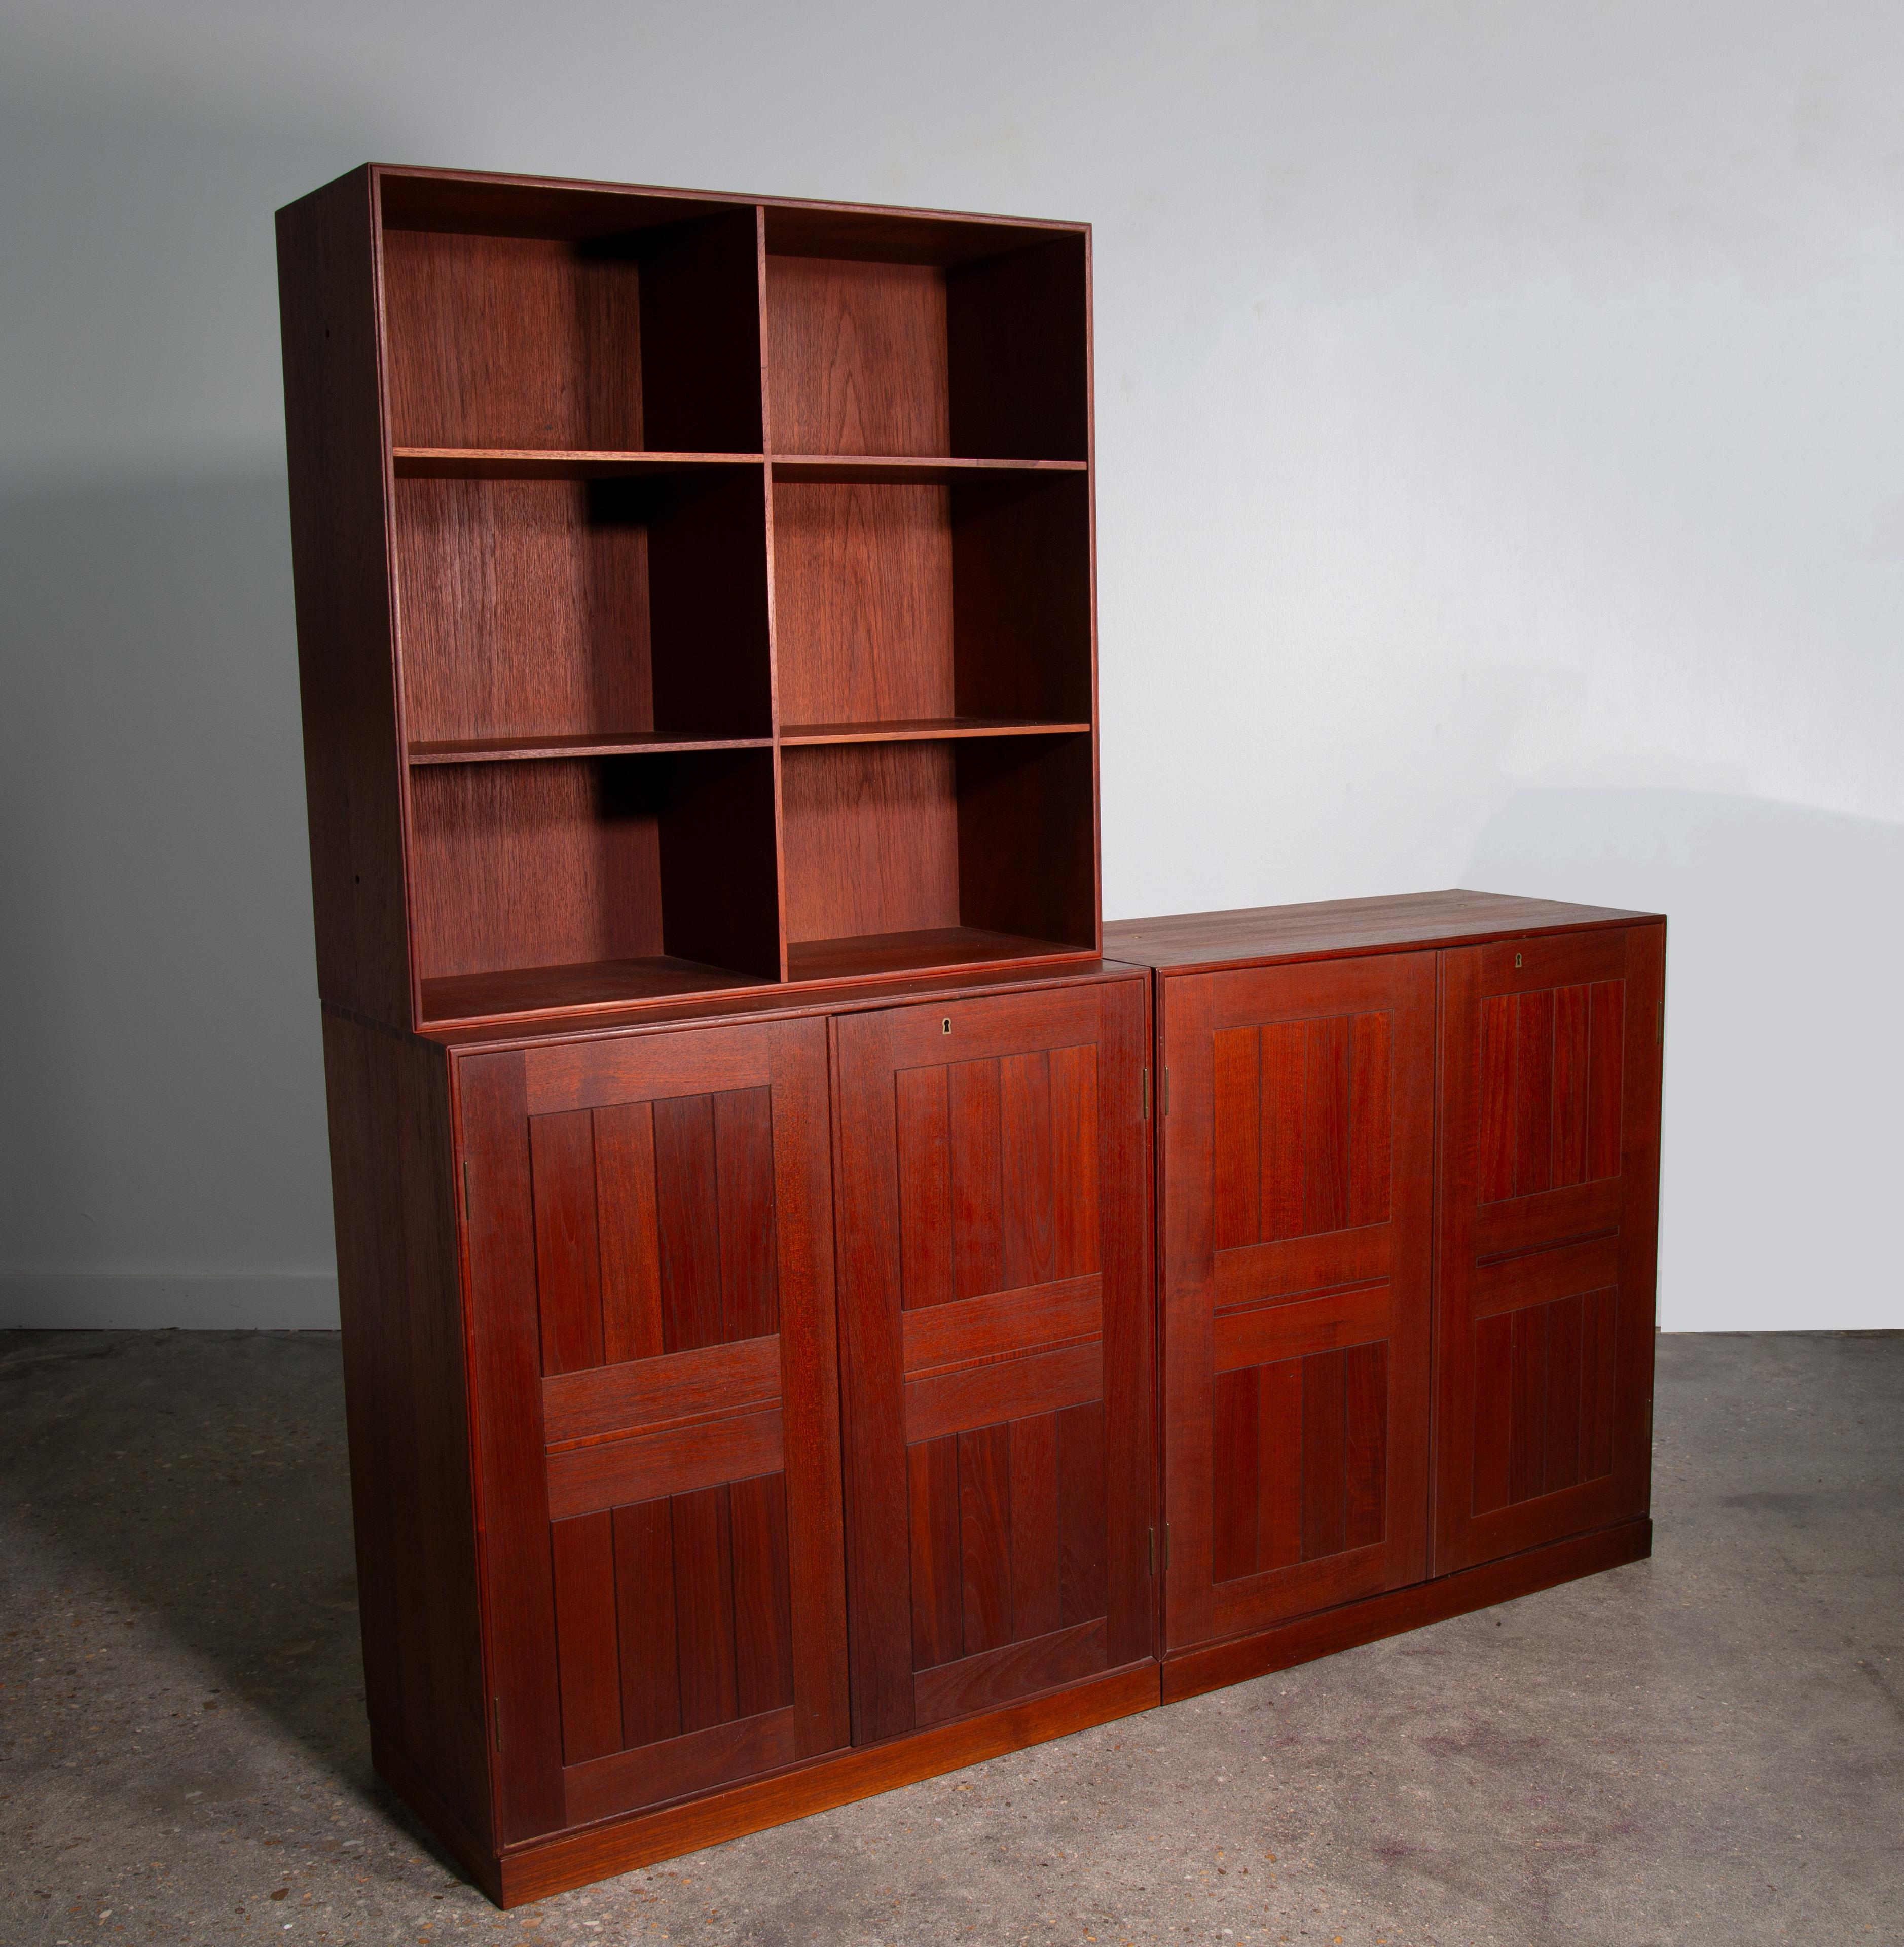 A set of three cabinets designed by Mogens Koch for Rud Rasmussen in Teak.  The set includes two cabinets with doors and an open bookshelf. The set includes three removable plinths so these can be used in one long  3x1  configuration or stacked